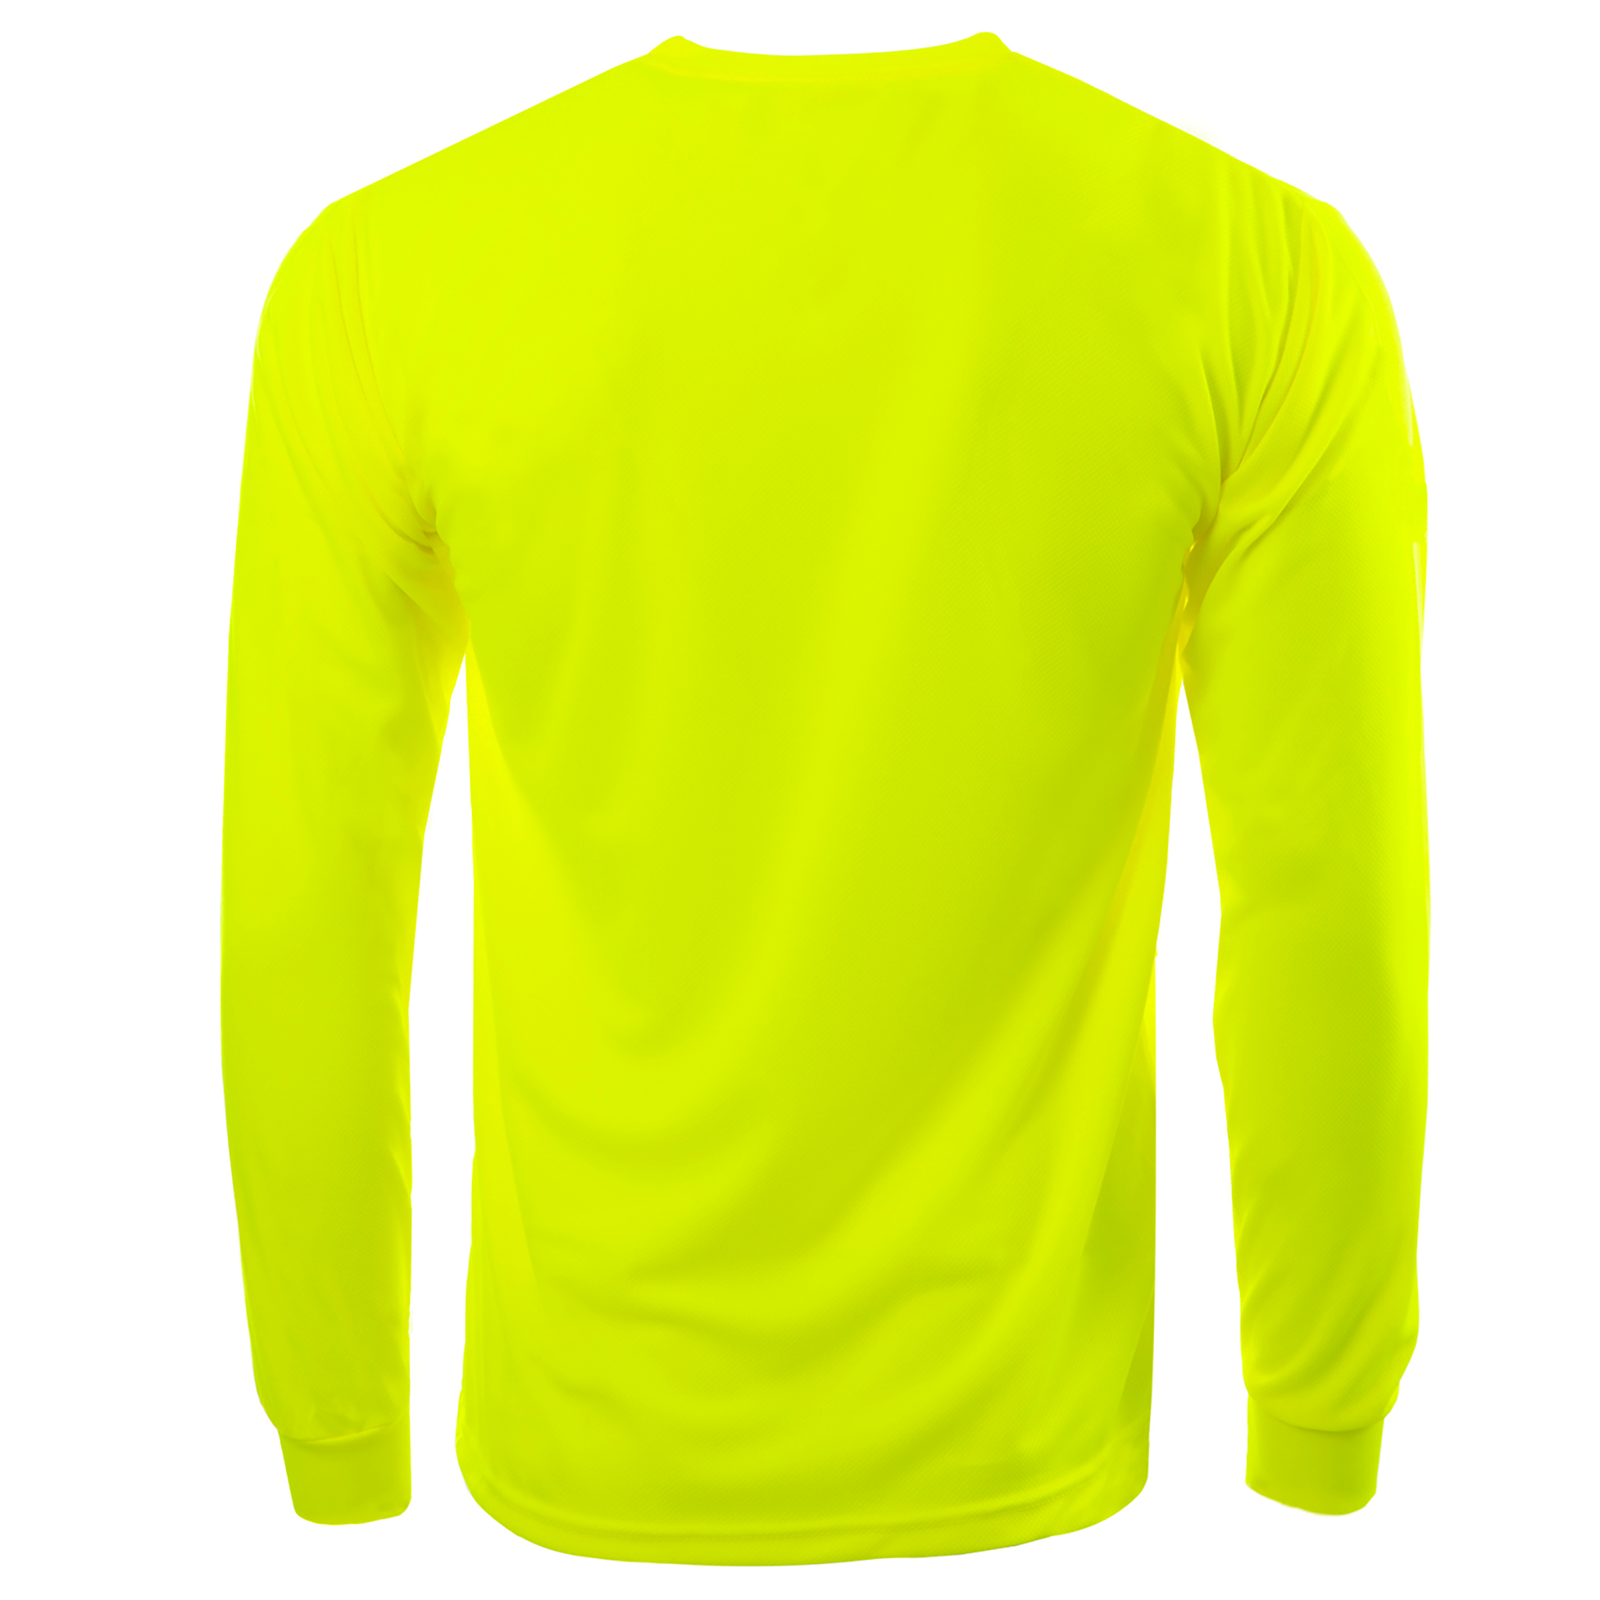 Back view of the Hi-vis safety long sleeve lime shirts